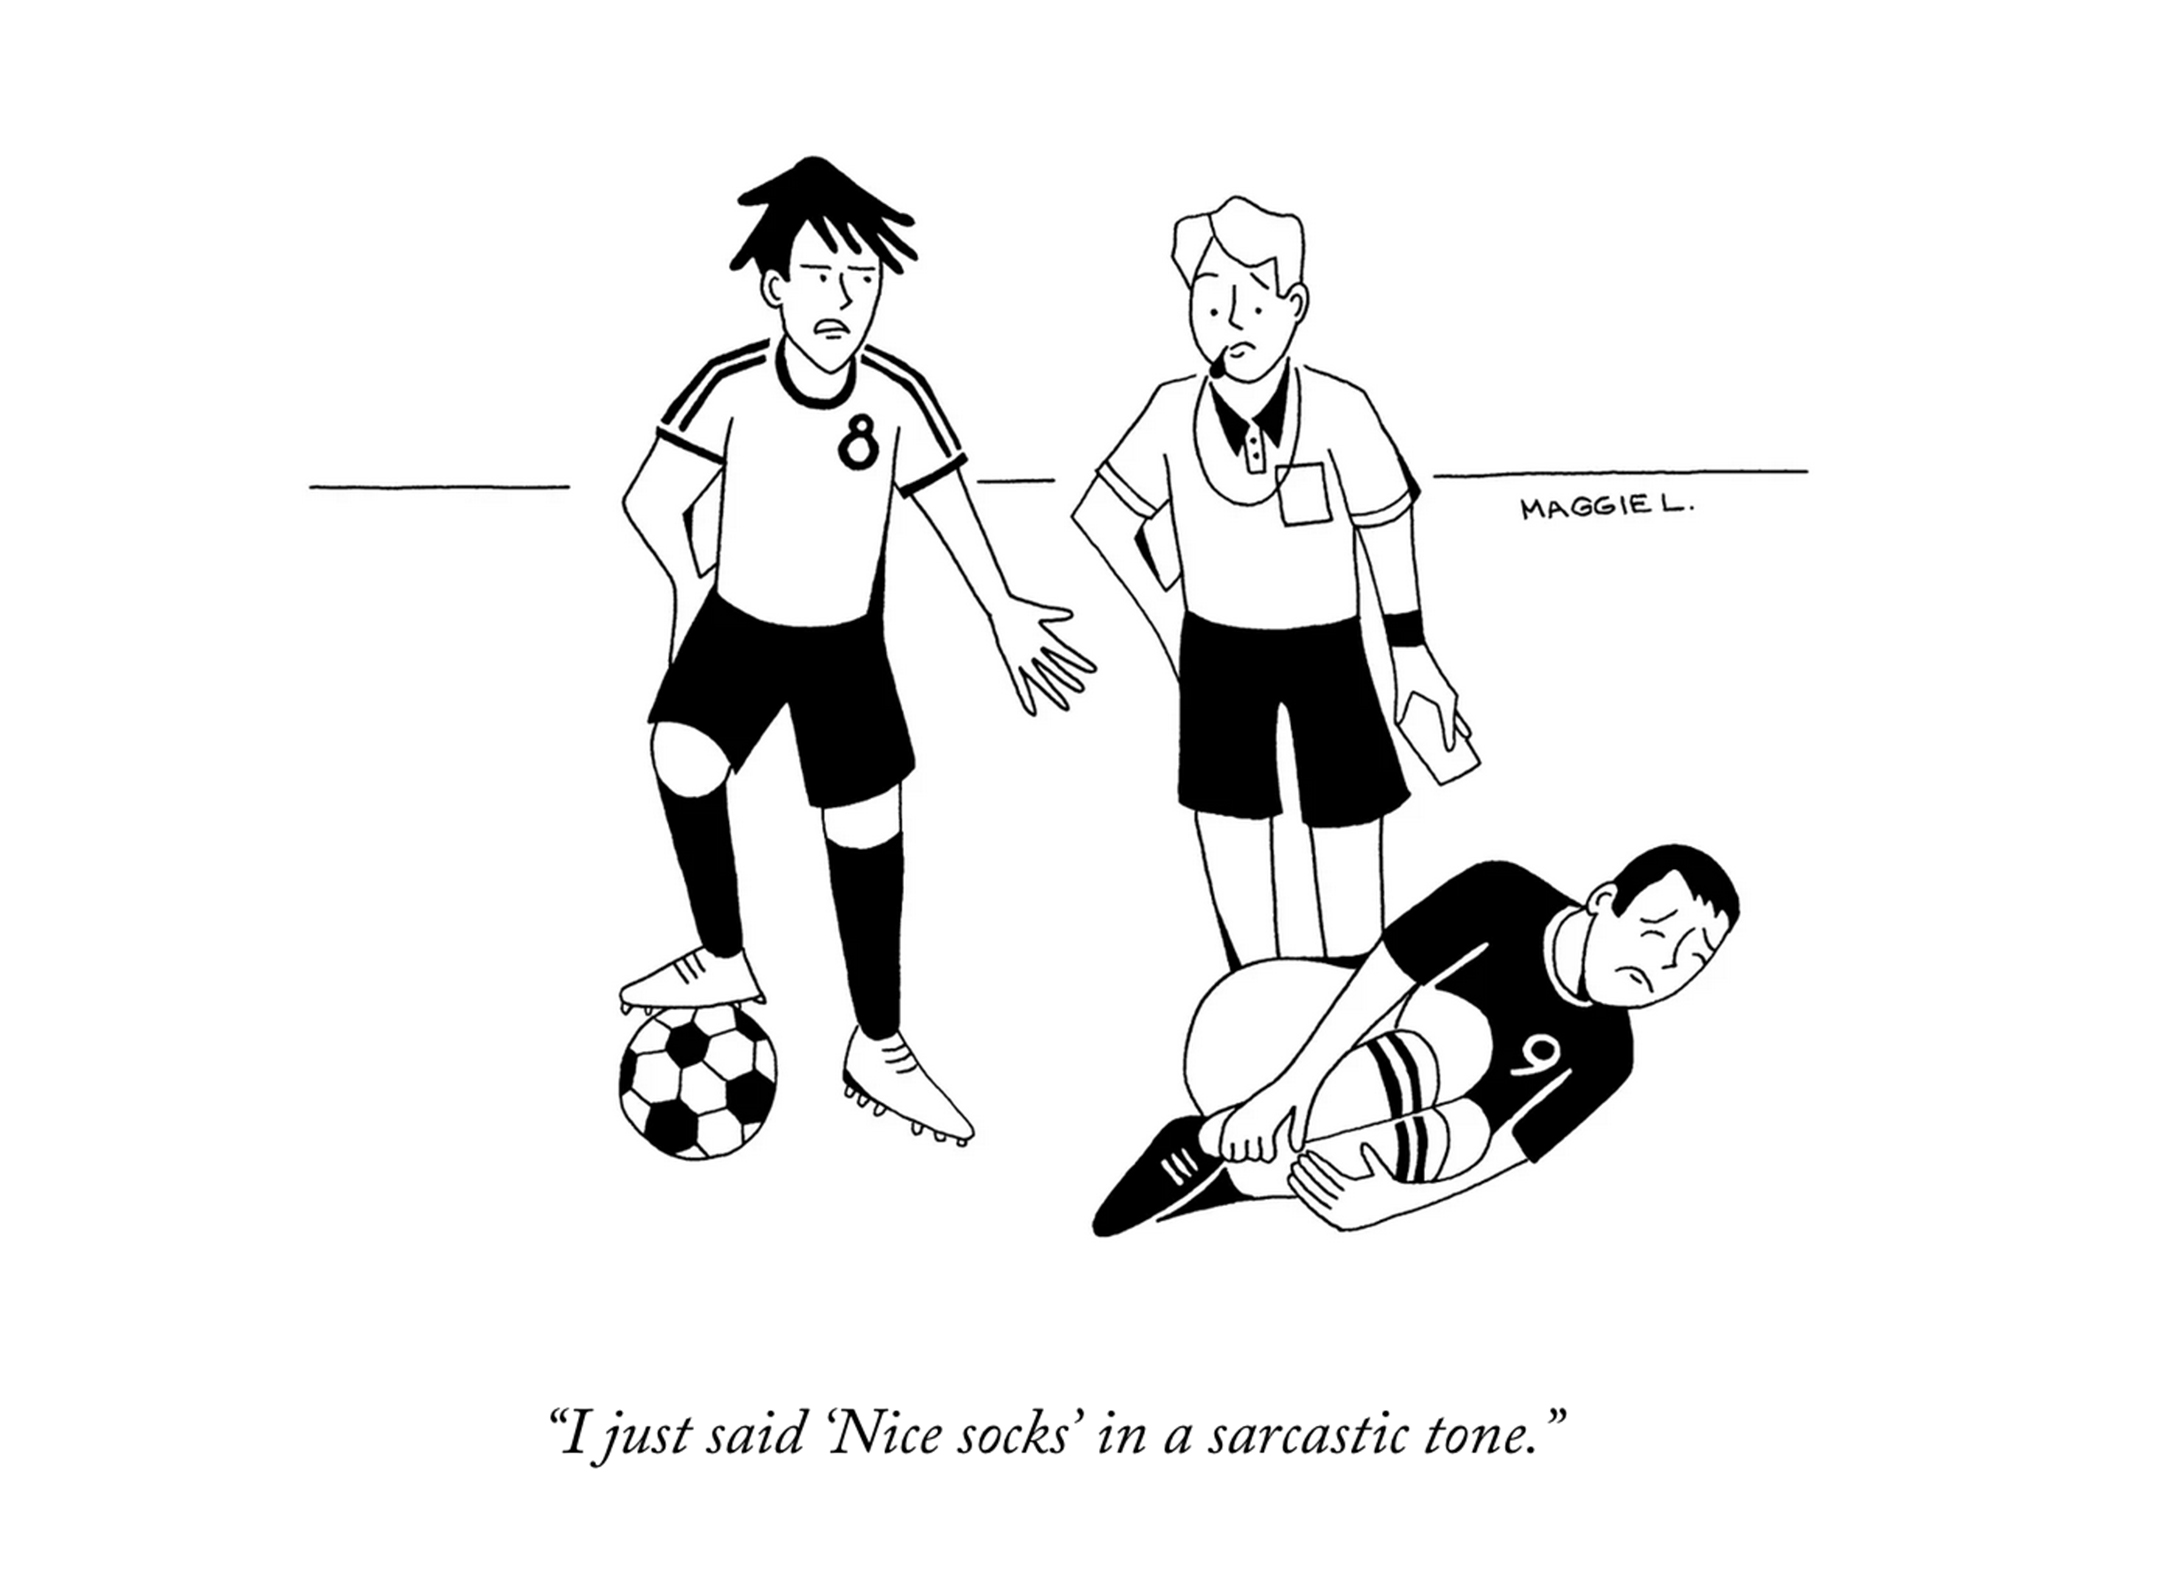 Cartoon depicting two soccer players and a referee. One player is on the ground holding his leg. The other says "I just said 'nice socks' in a sarcastic tone."